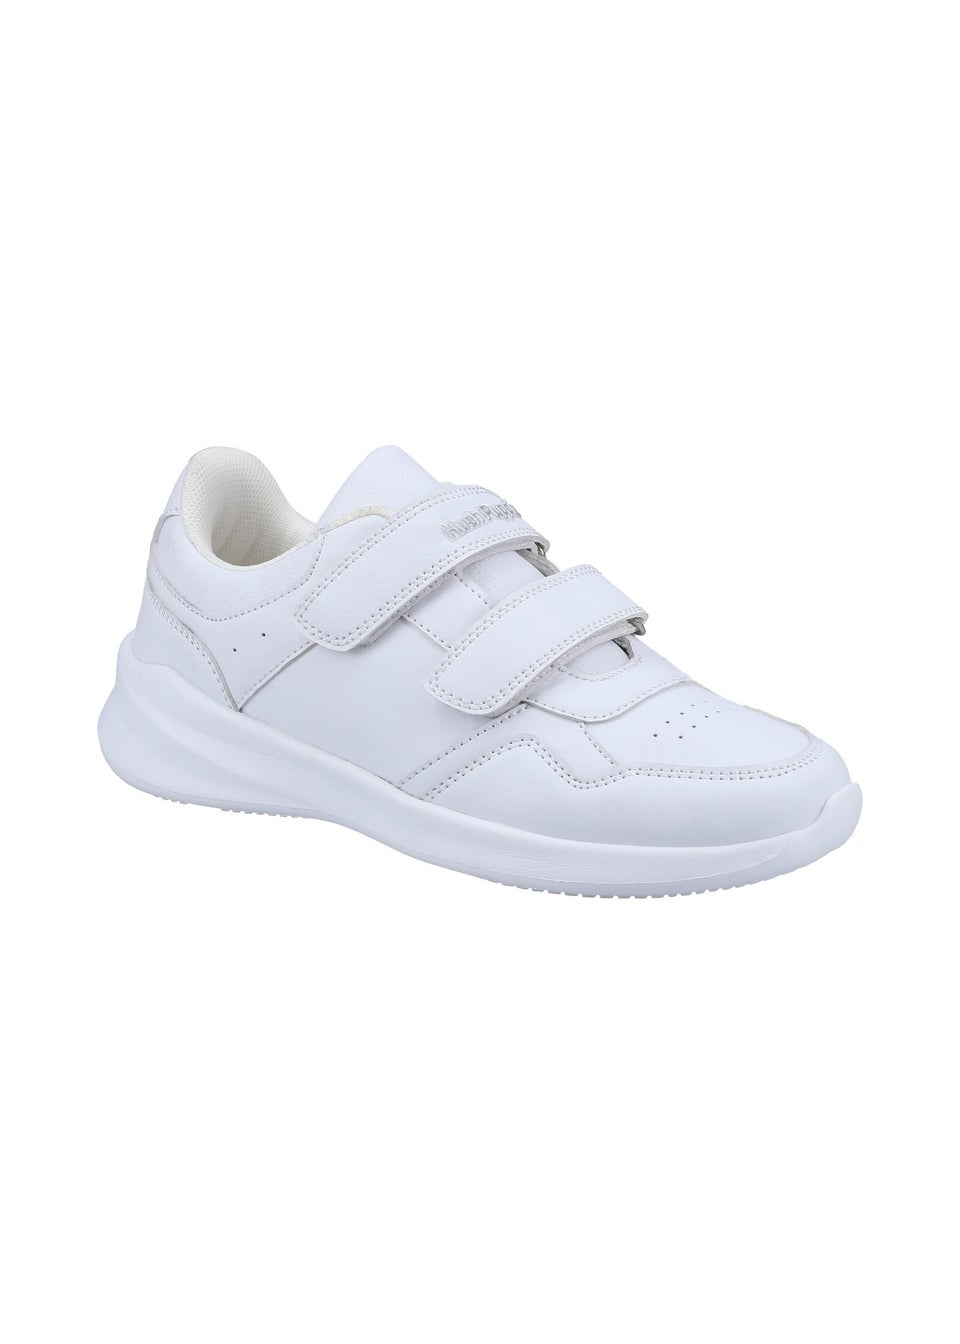 Hush Puppies Unisex White Marling Easy Junior School Shoes (Younger 10 - Older 2)